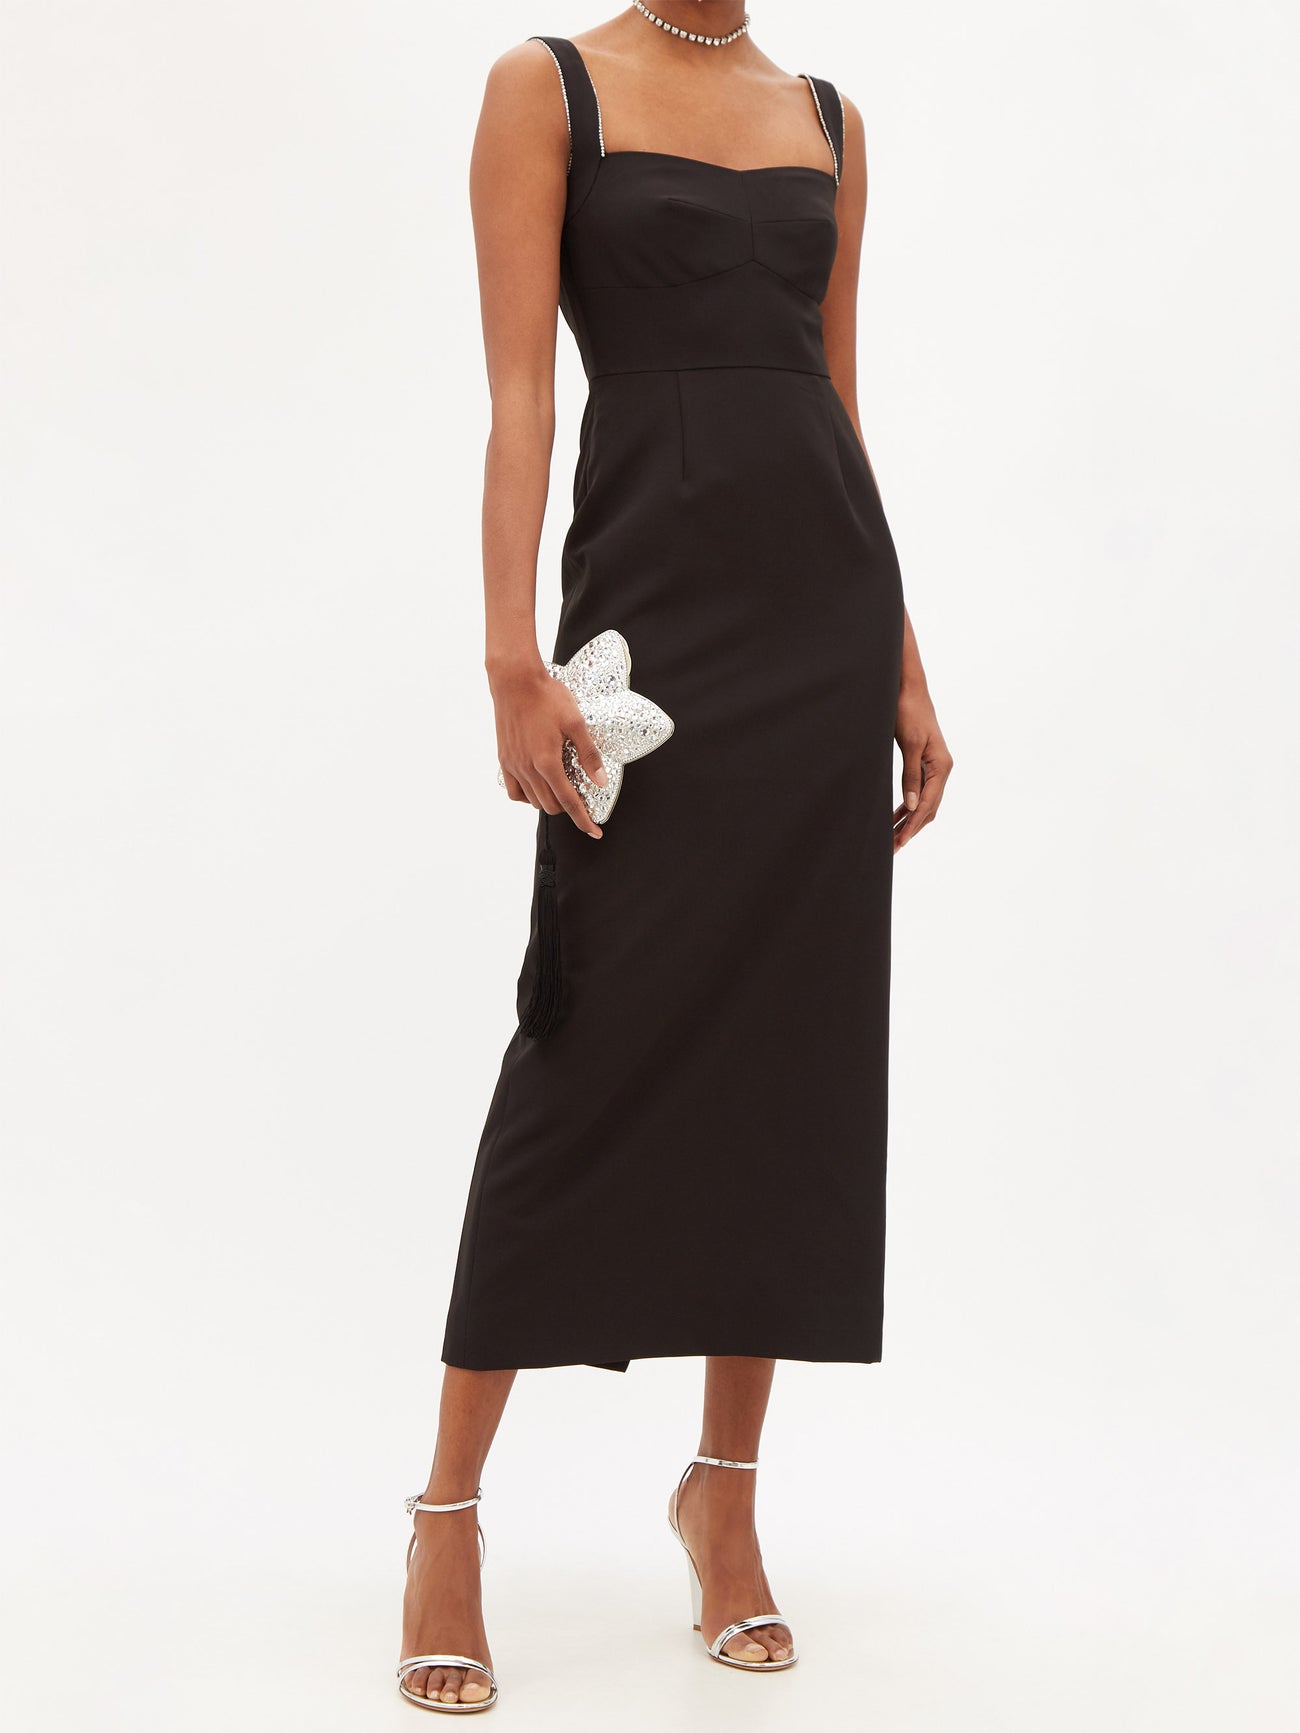 Saloni frames the sweetheart neckline of this black slim fitting Midi dress with crystals along the shoulder straps. Dress features back slit for movement. 